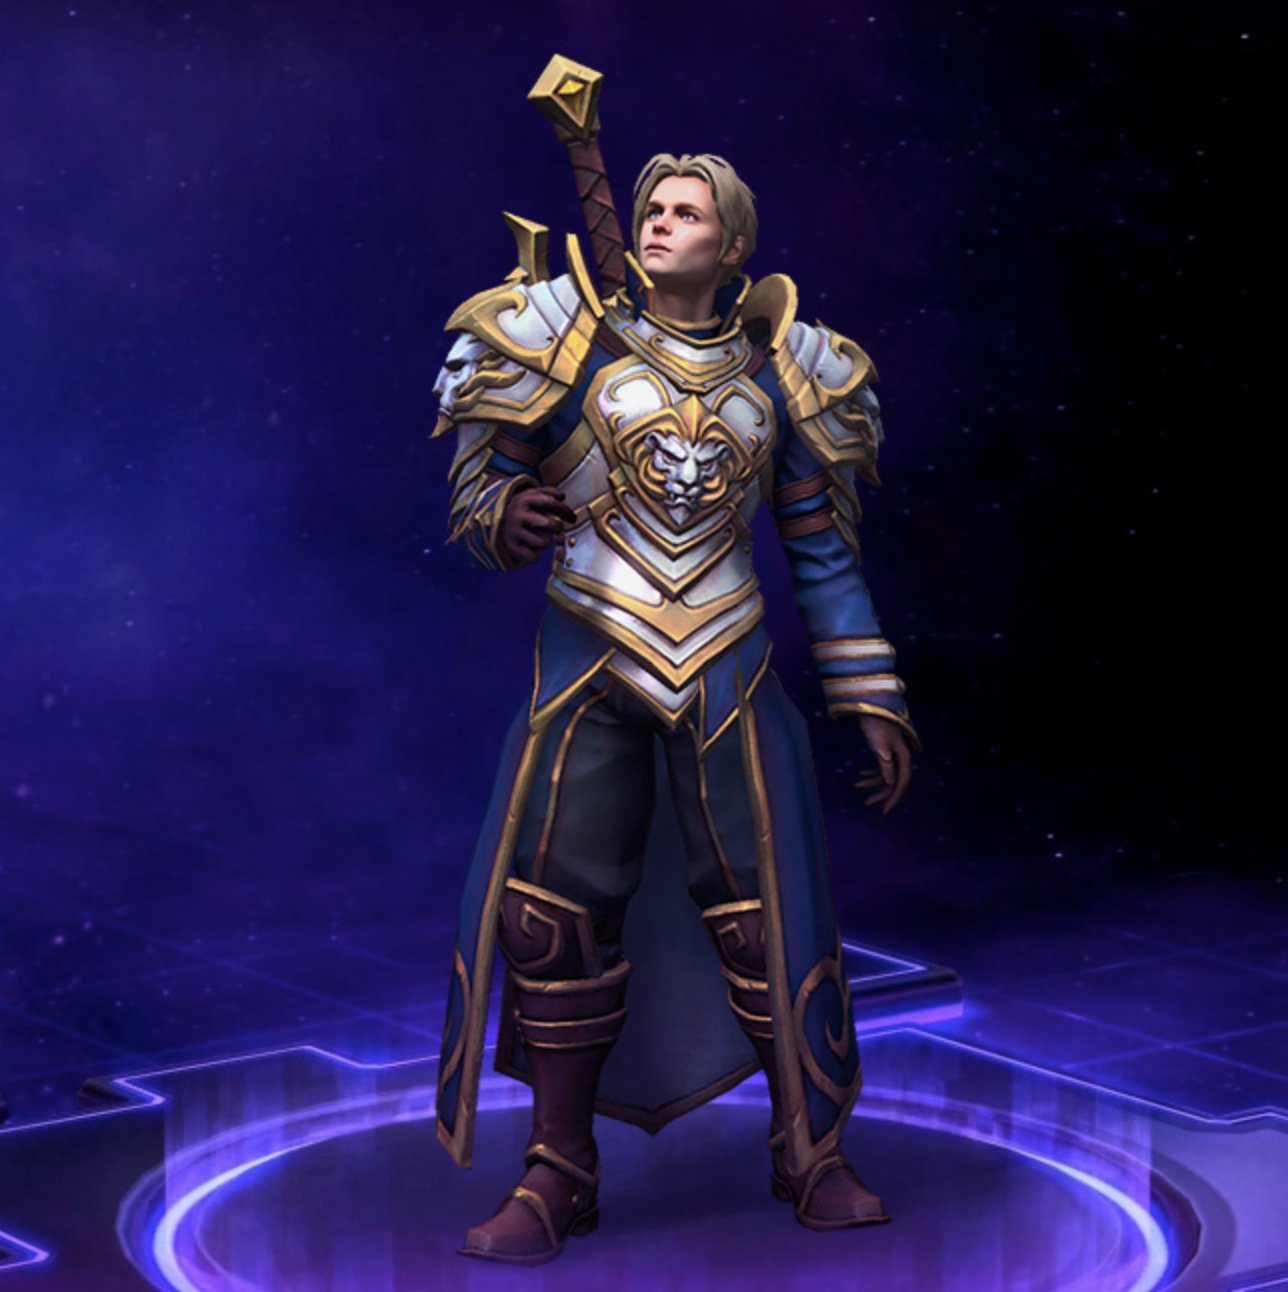 Anduin Build Guide “Injustice will not stand!&rdquo